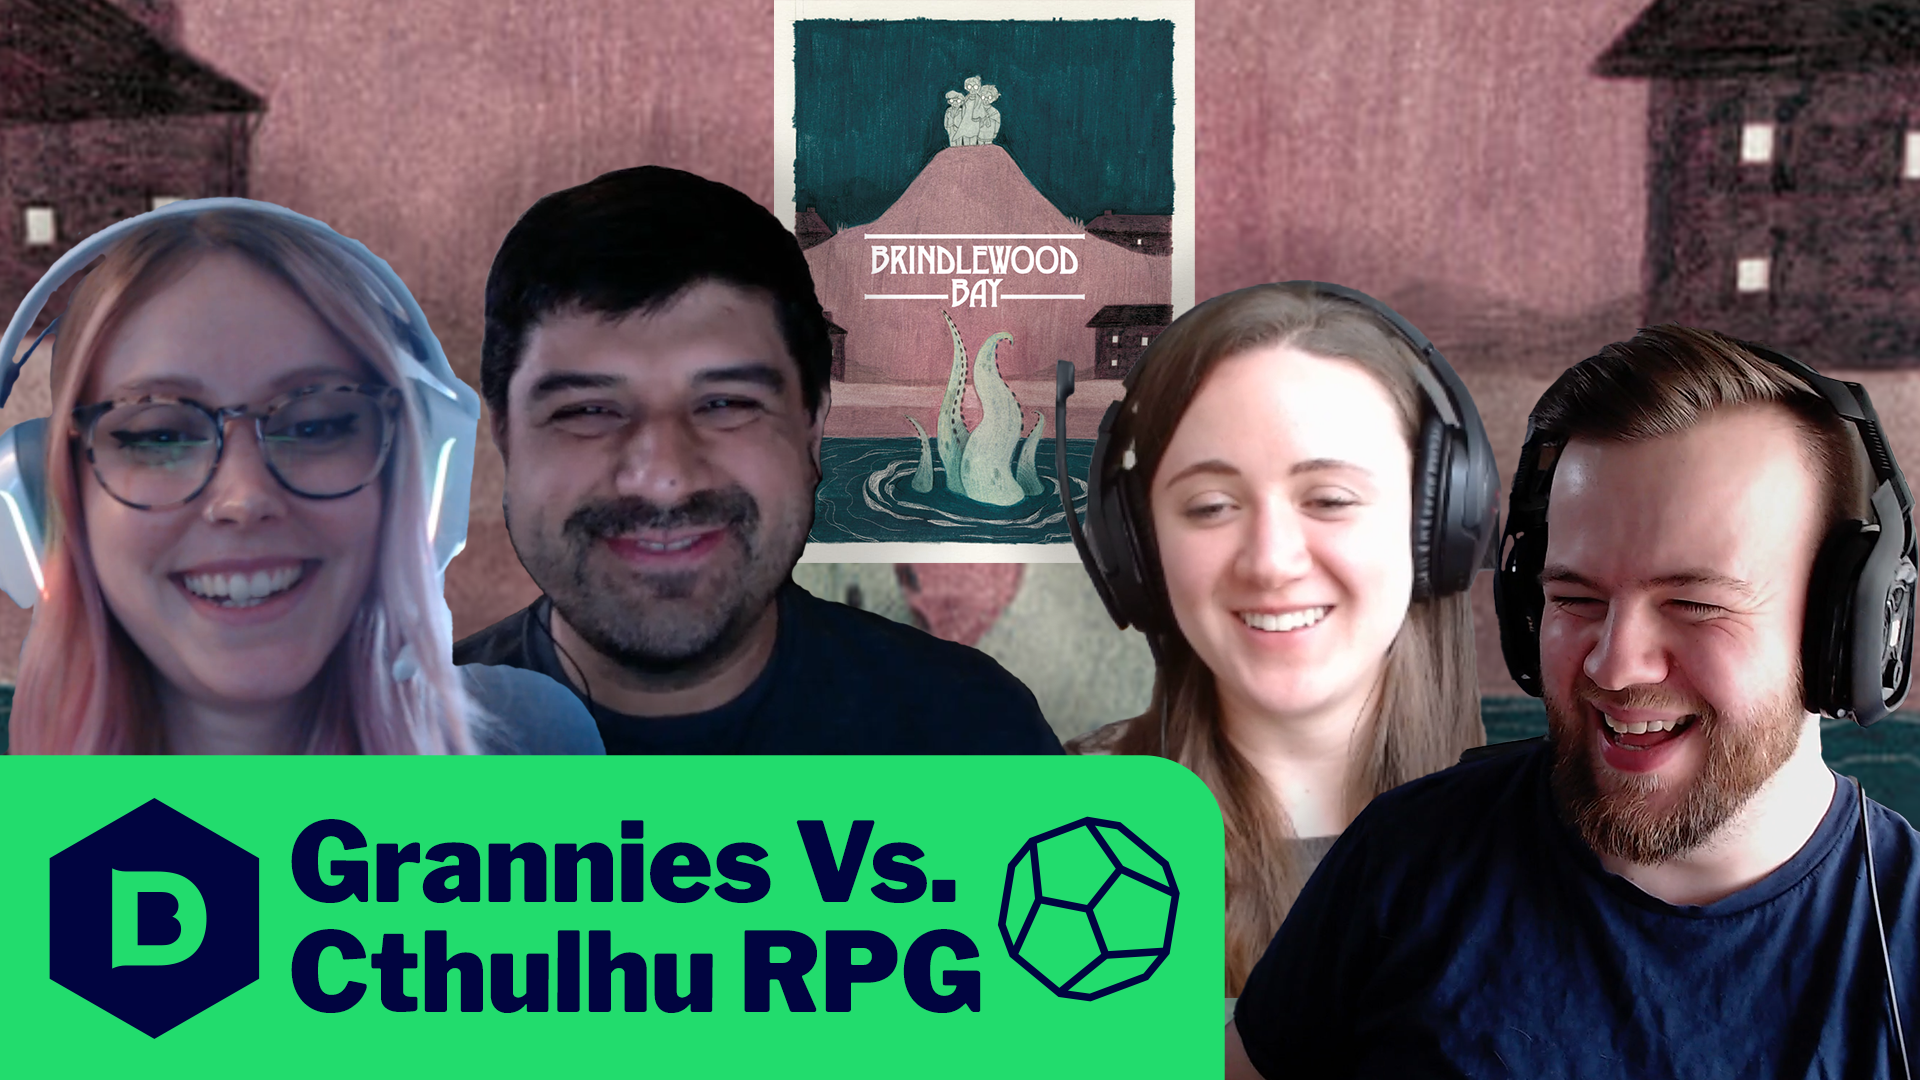 Image for It’s grannies versus Cthulhu as we play Brindlewood Bay RPG with Jason Cordova